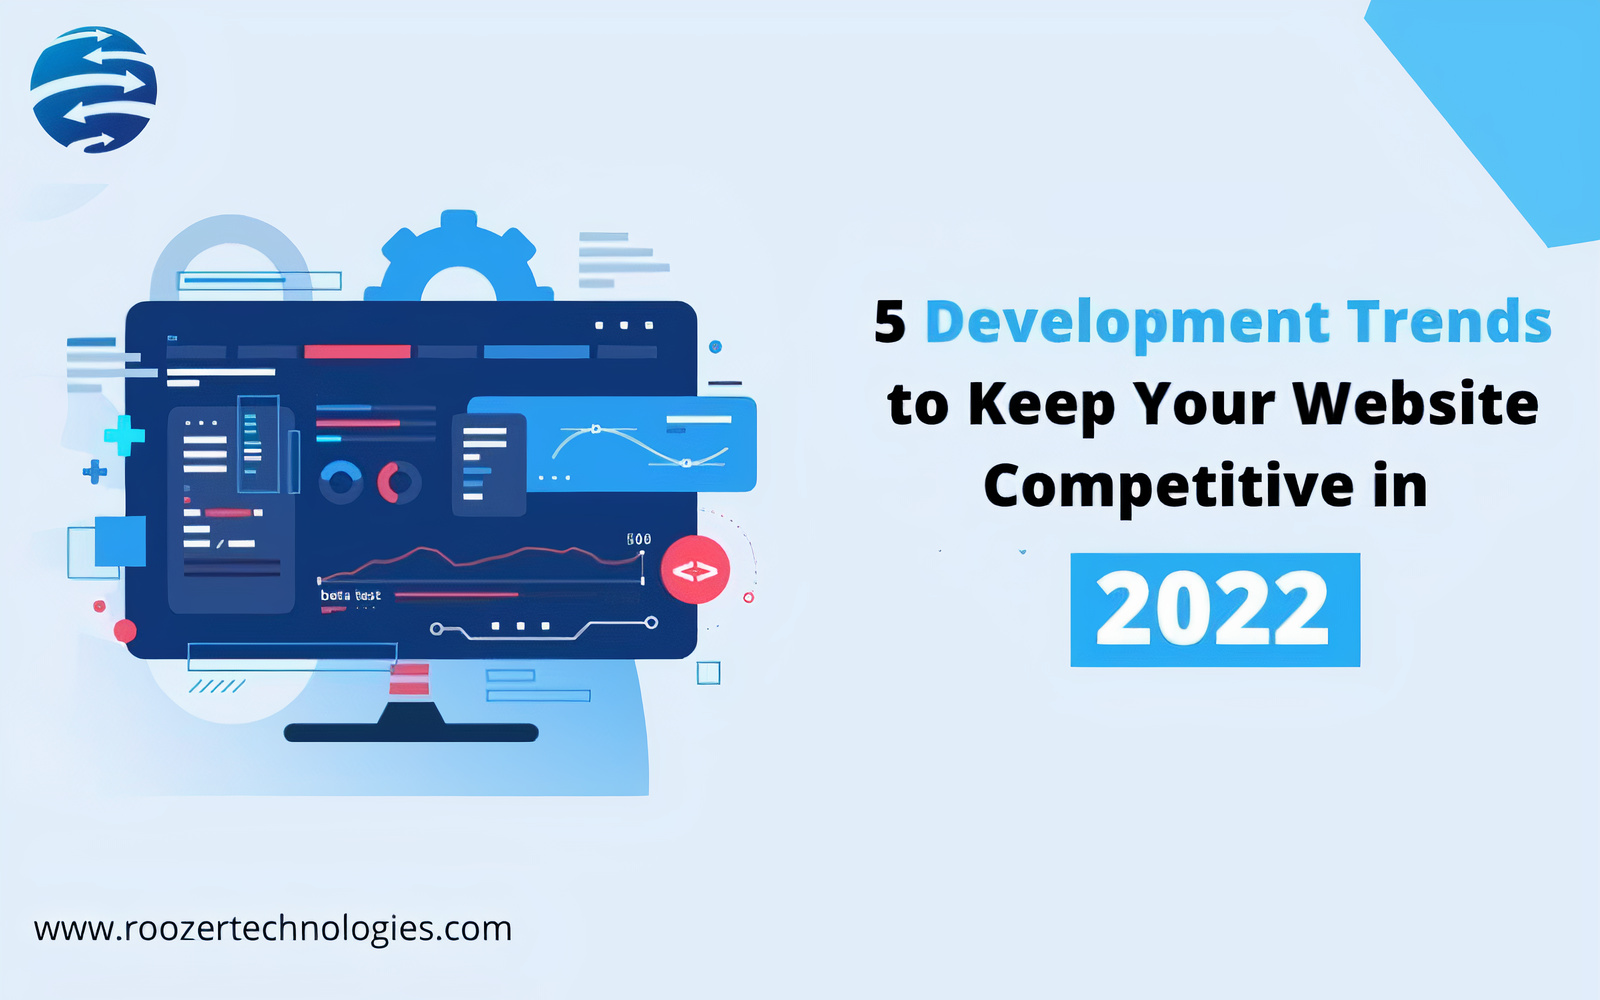 5 Development Trends to Keep Your Website Competitive in 2022